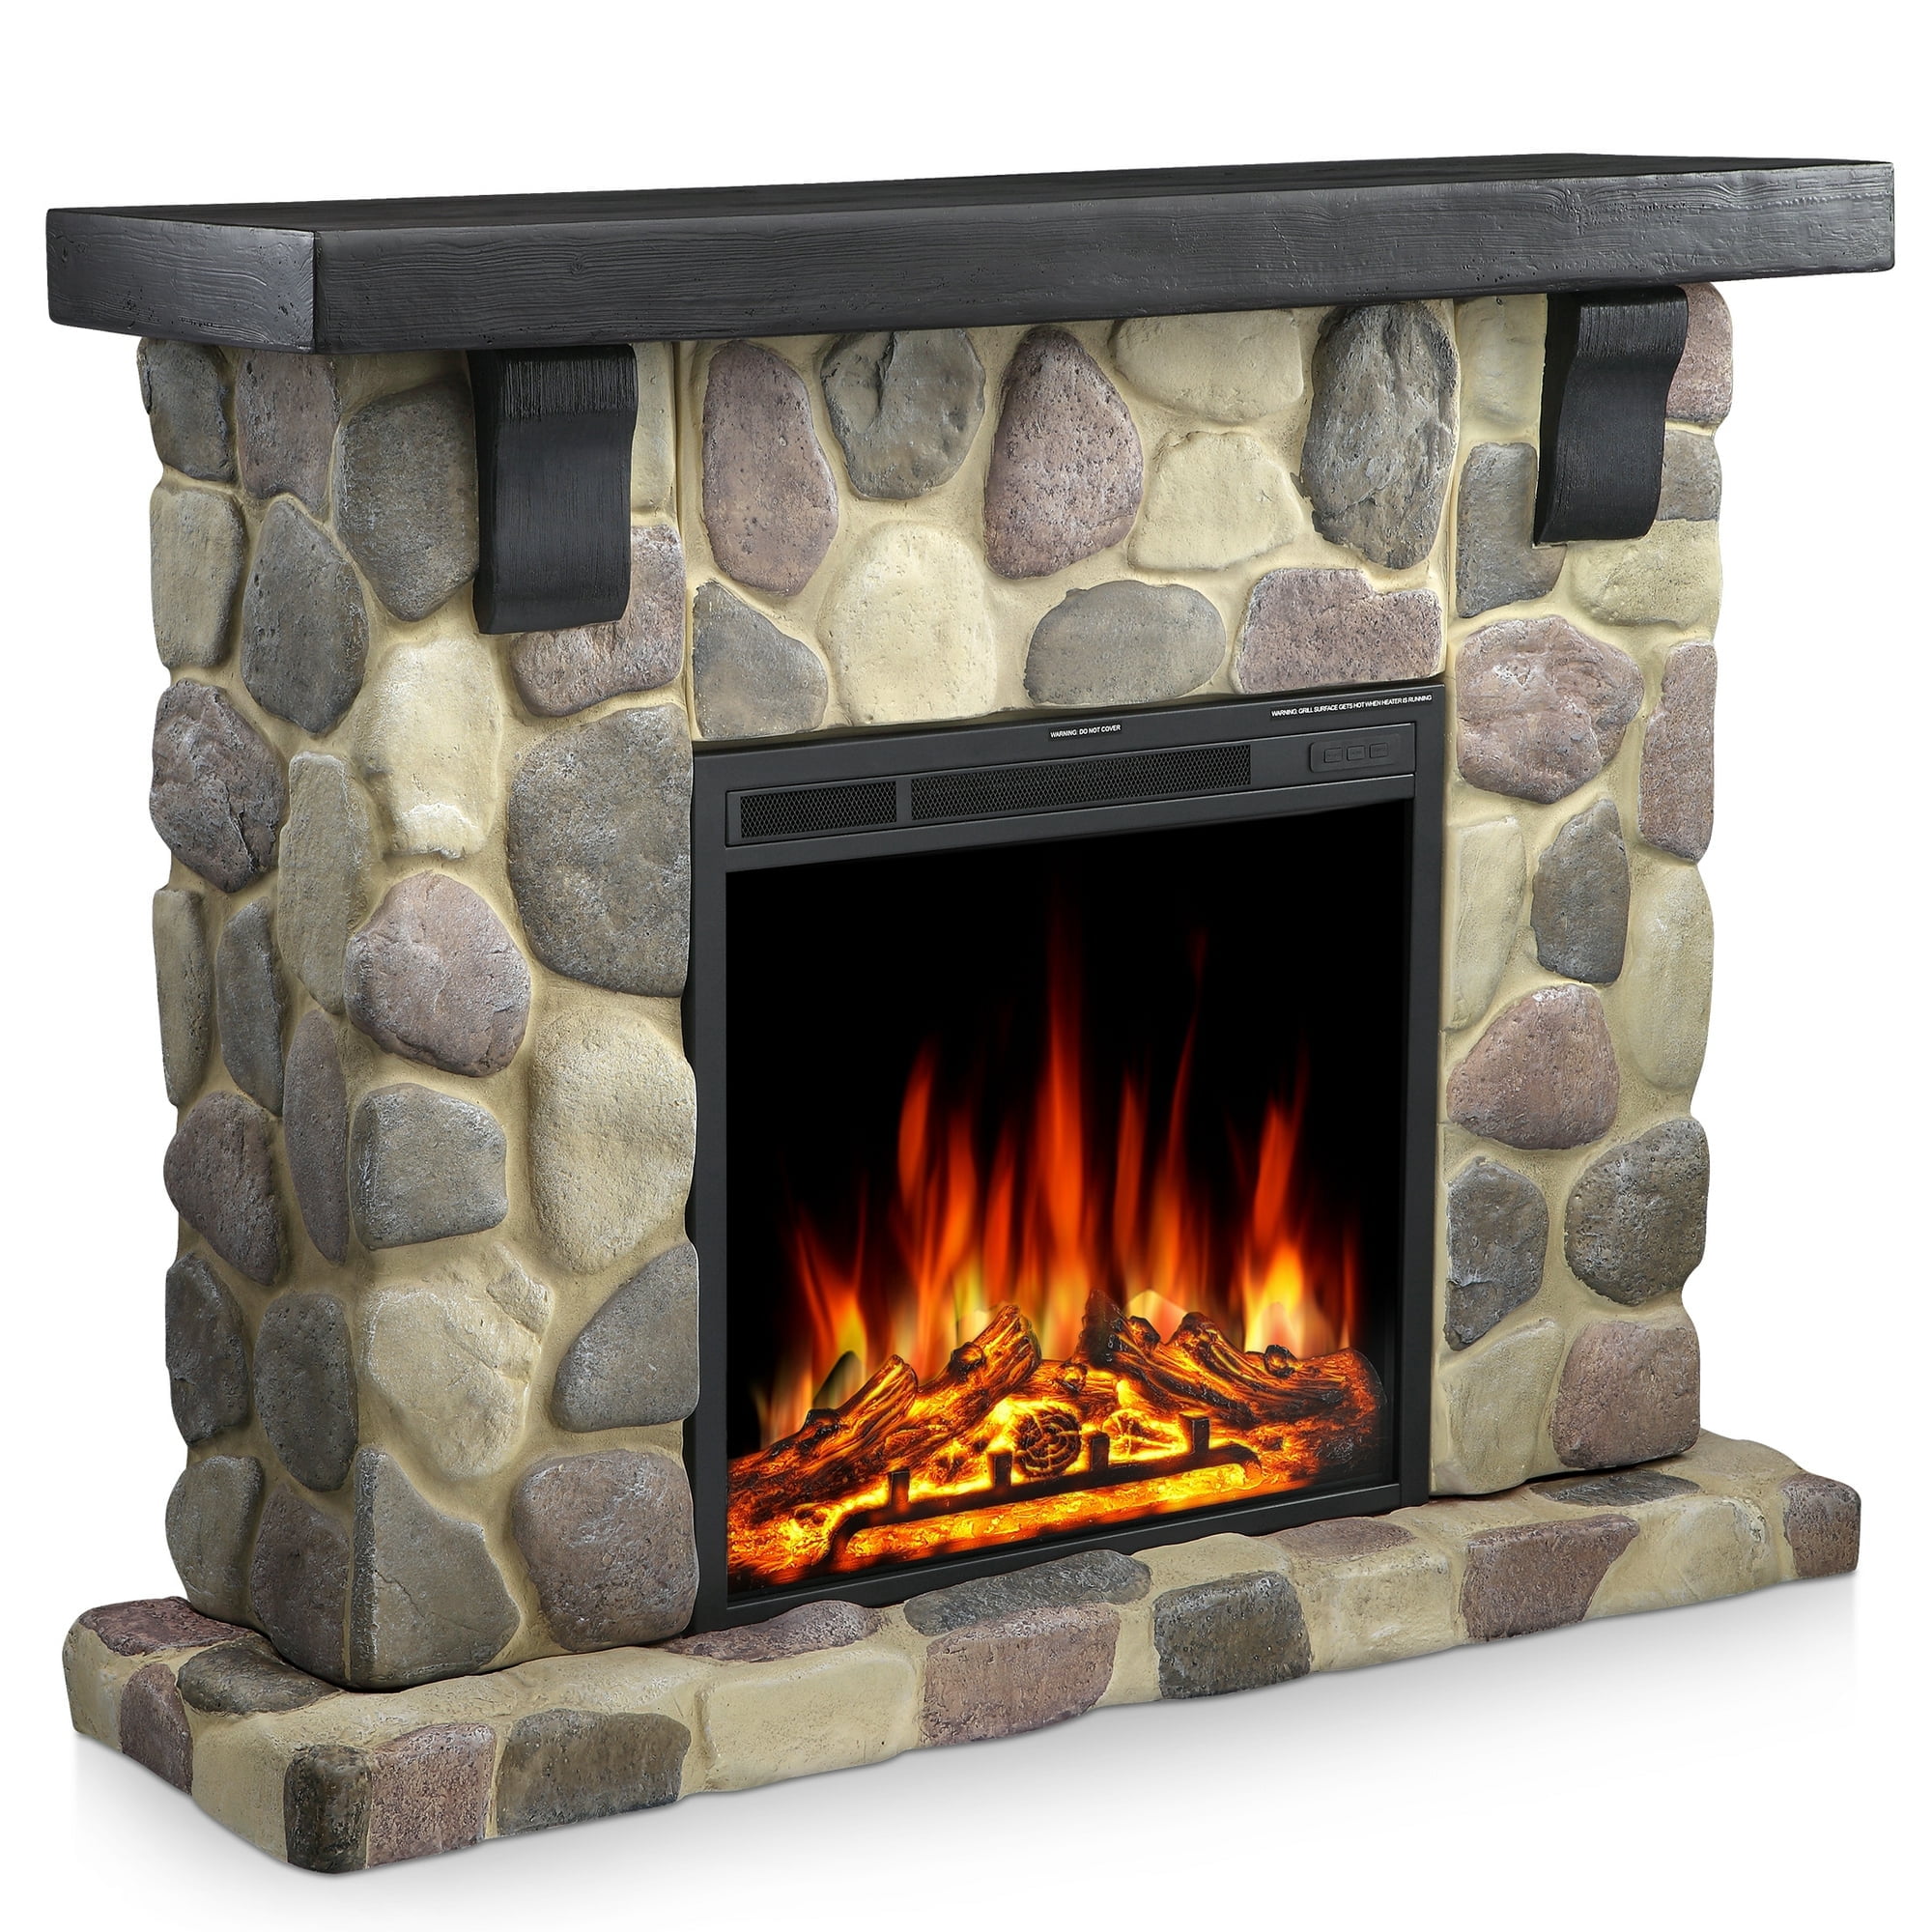 Mantel Protector - MEECO's Red Devil